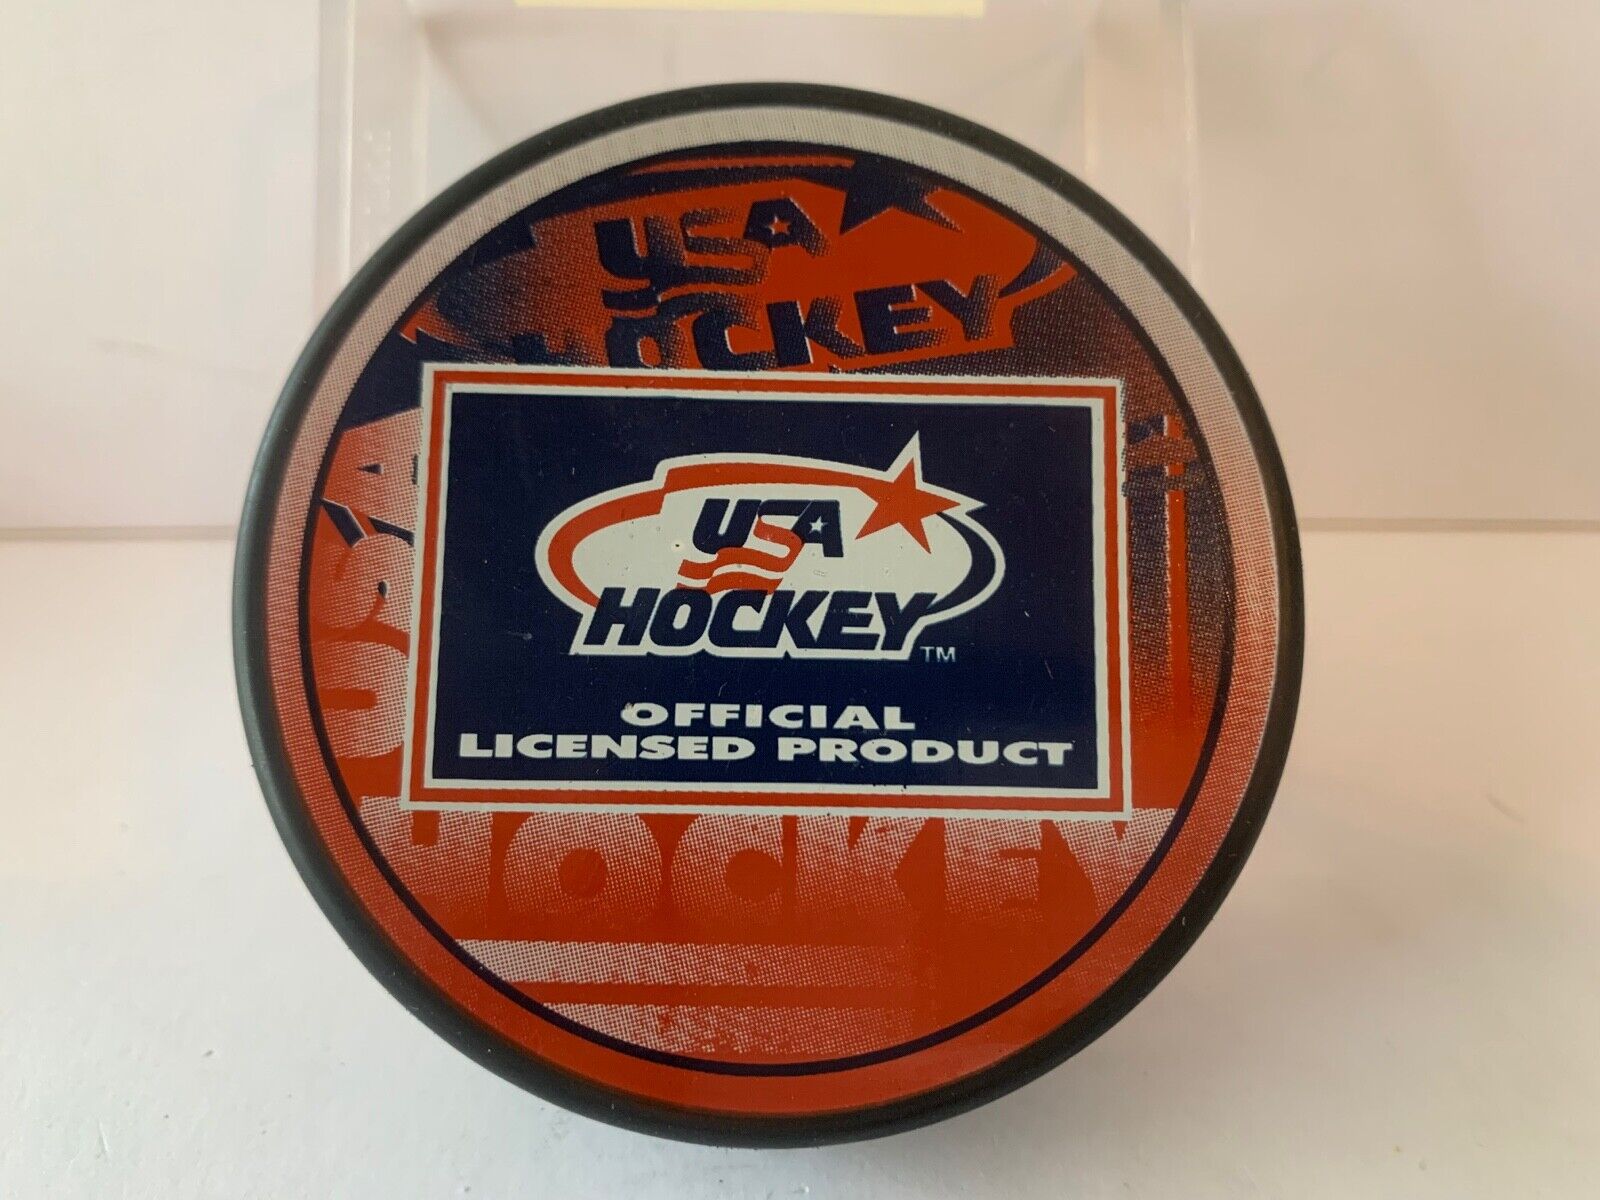 Peter Laviolette Autographed Official NHL Hockey Puck with Team USA Hockey Logo